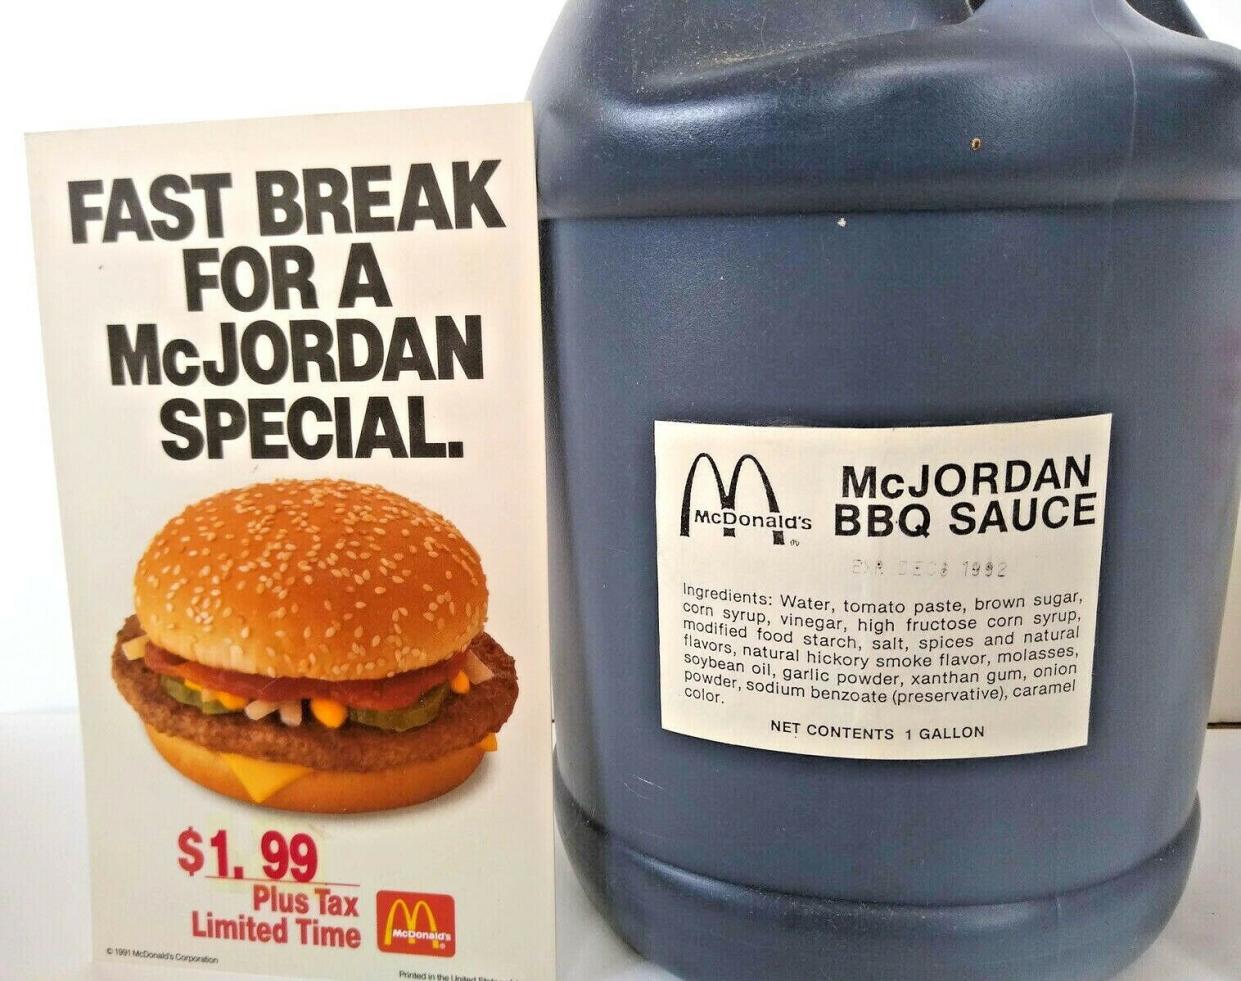 Large container of McJordan BBQ Sauce with an ad for the McJordan special